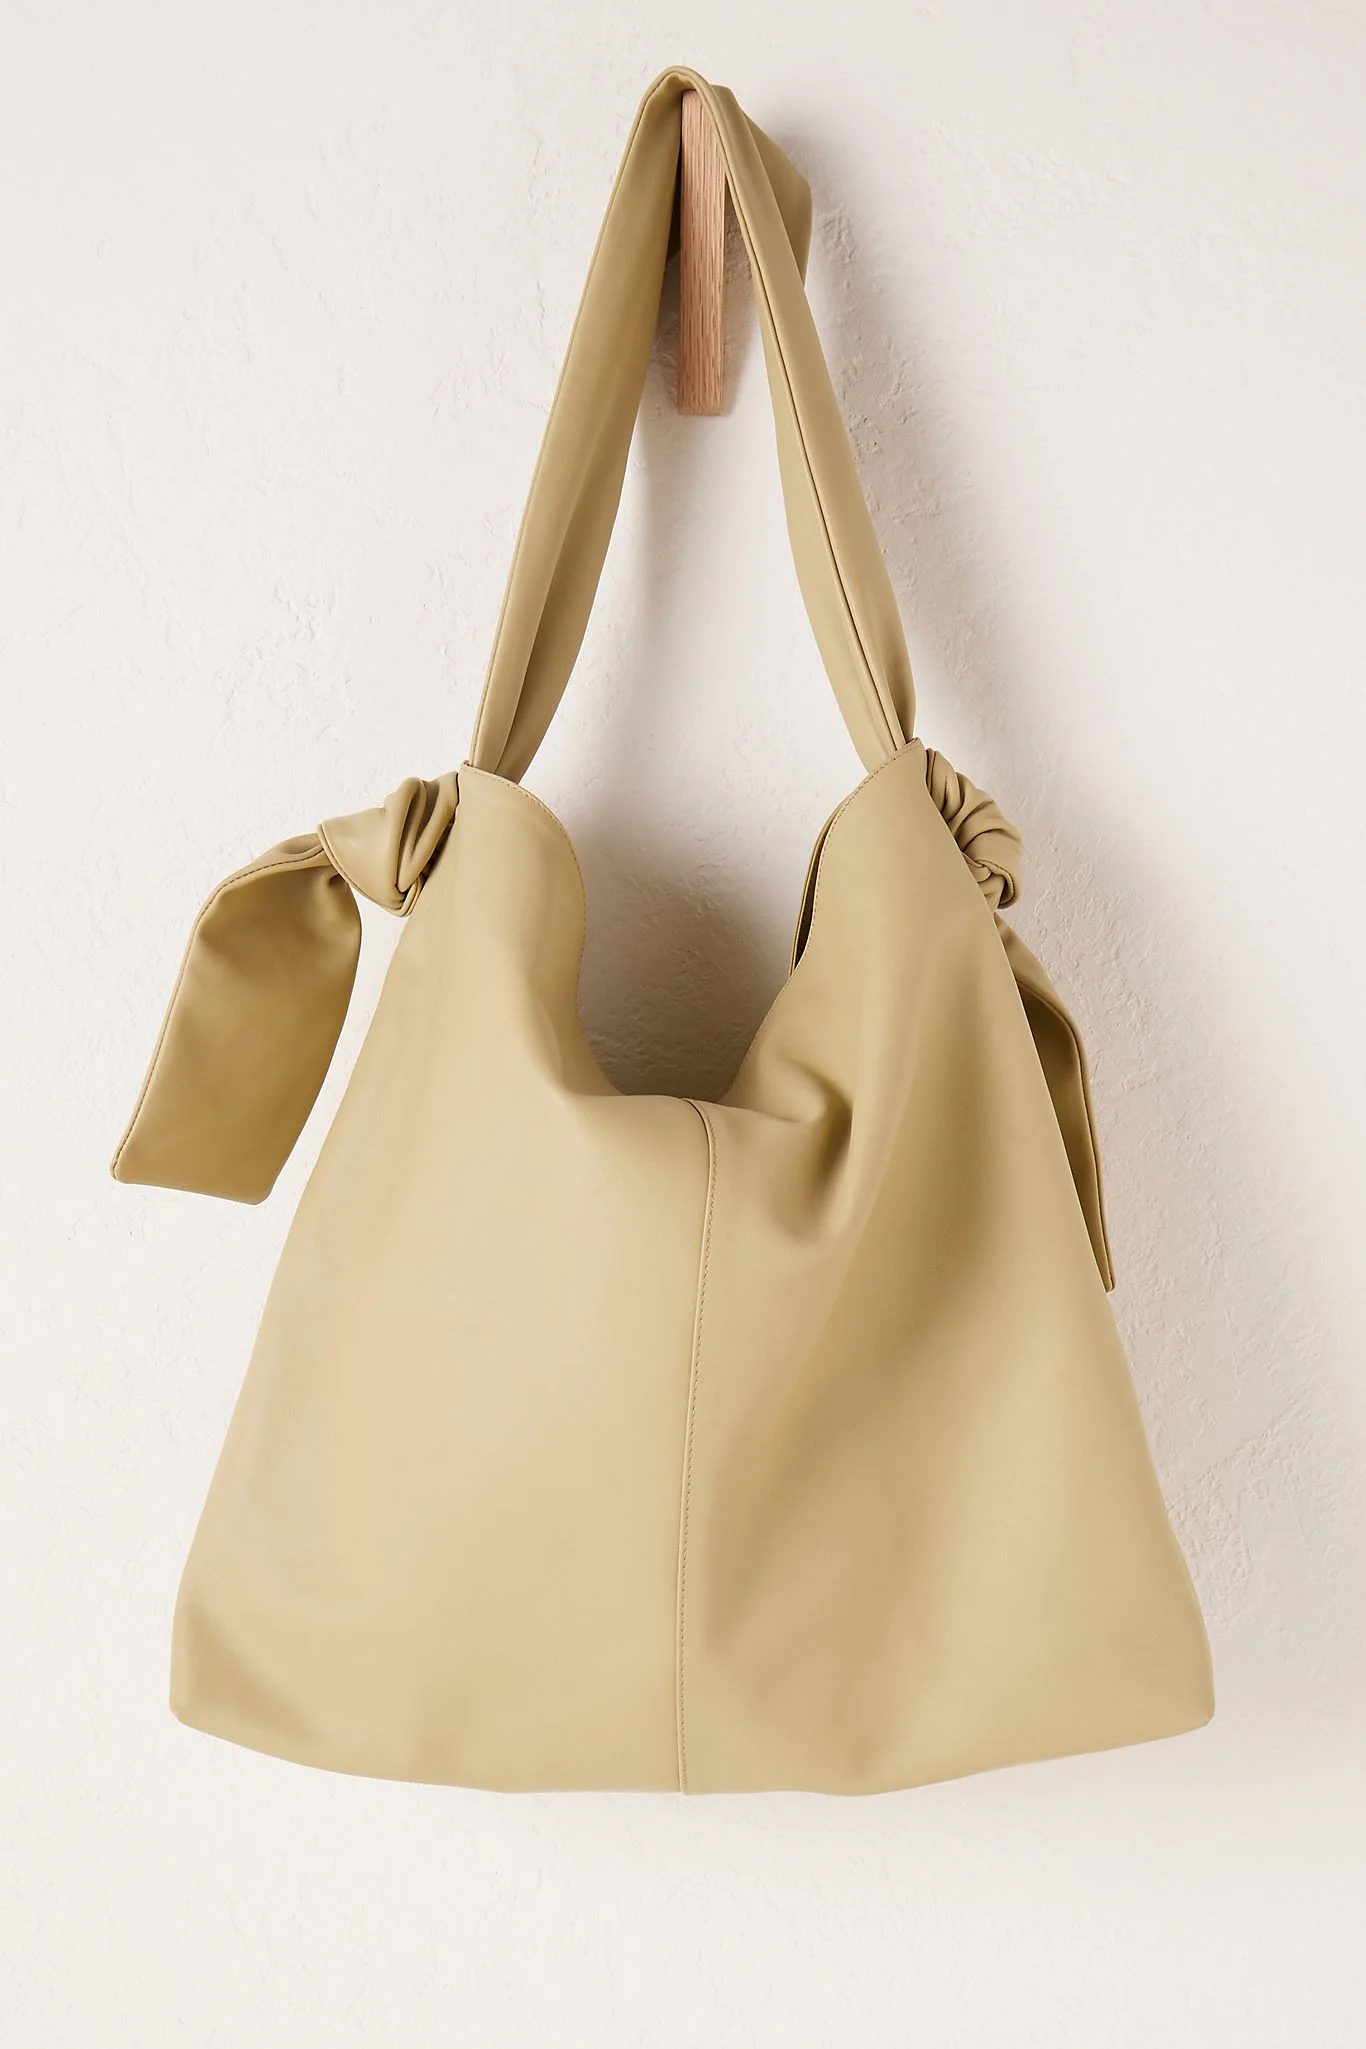 Anthropologie + Knotted Leather Slouchy Tote Bag